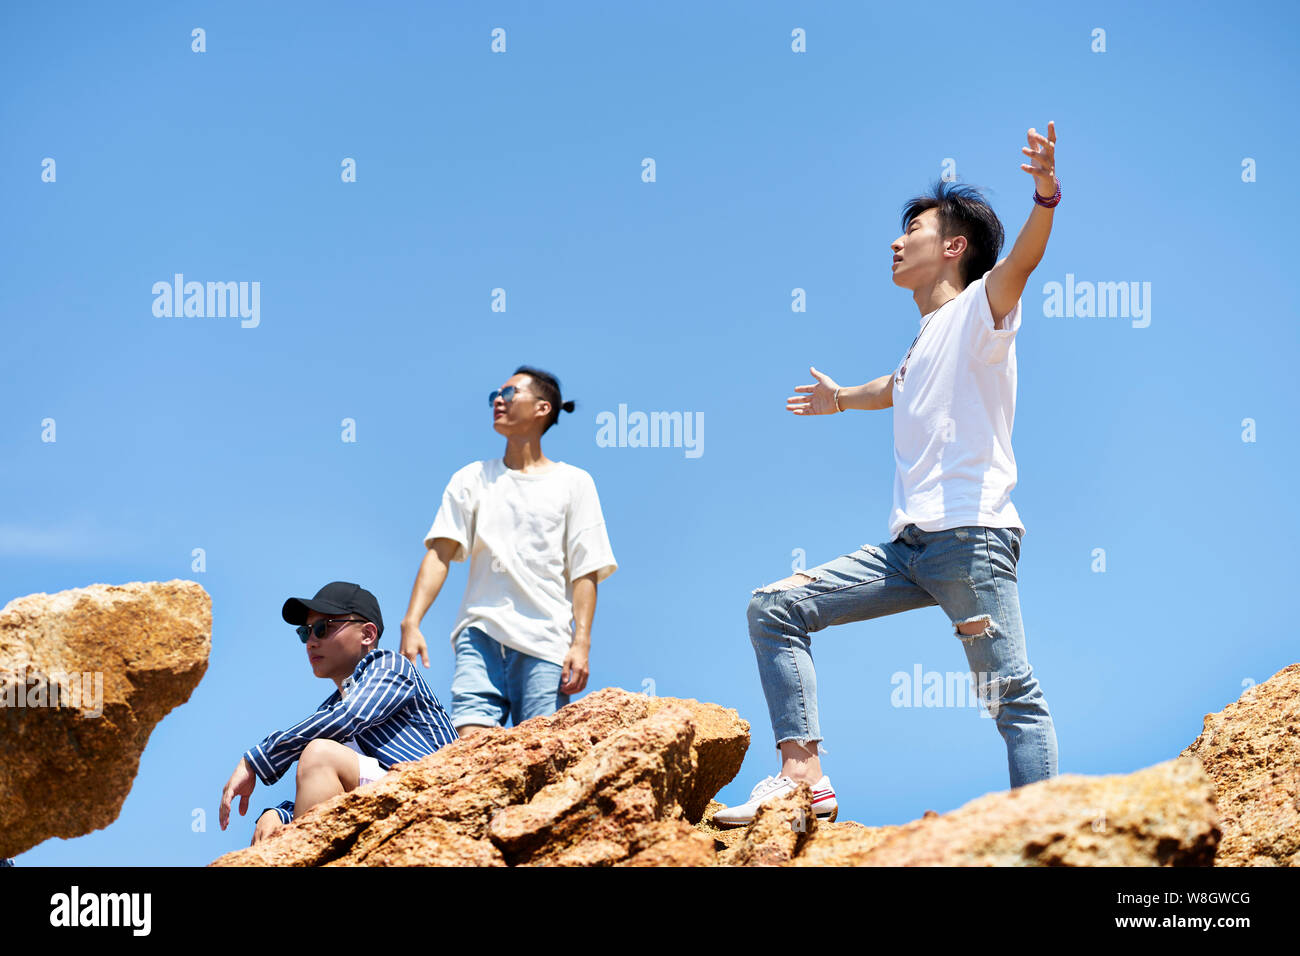 group of young asian adult men standing on top of rocks against blue sky enjoying sunshine and fresh air Stock Photo